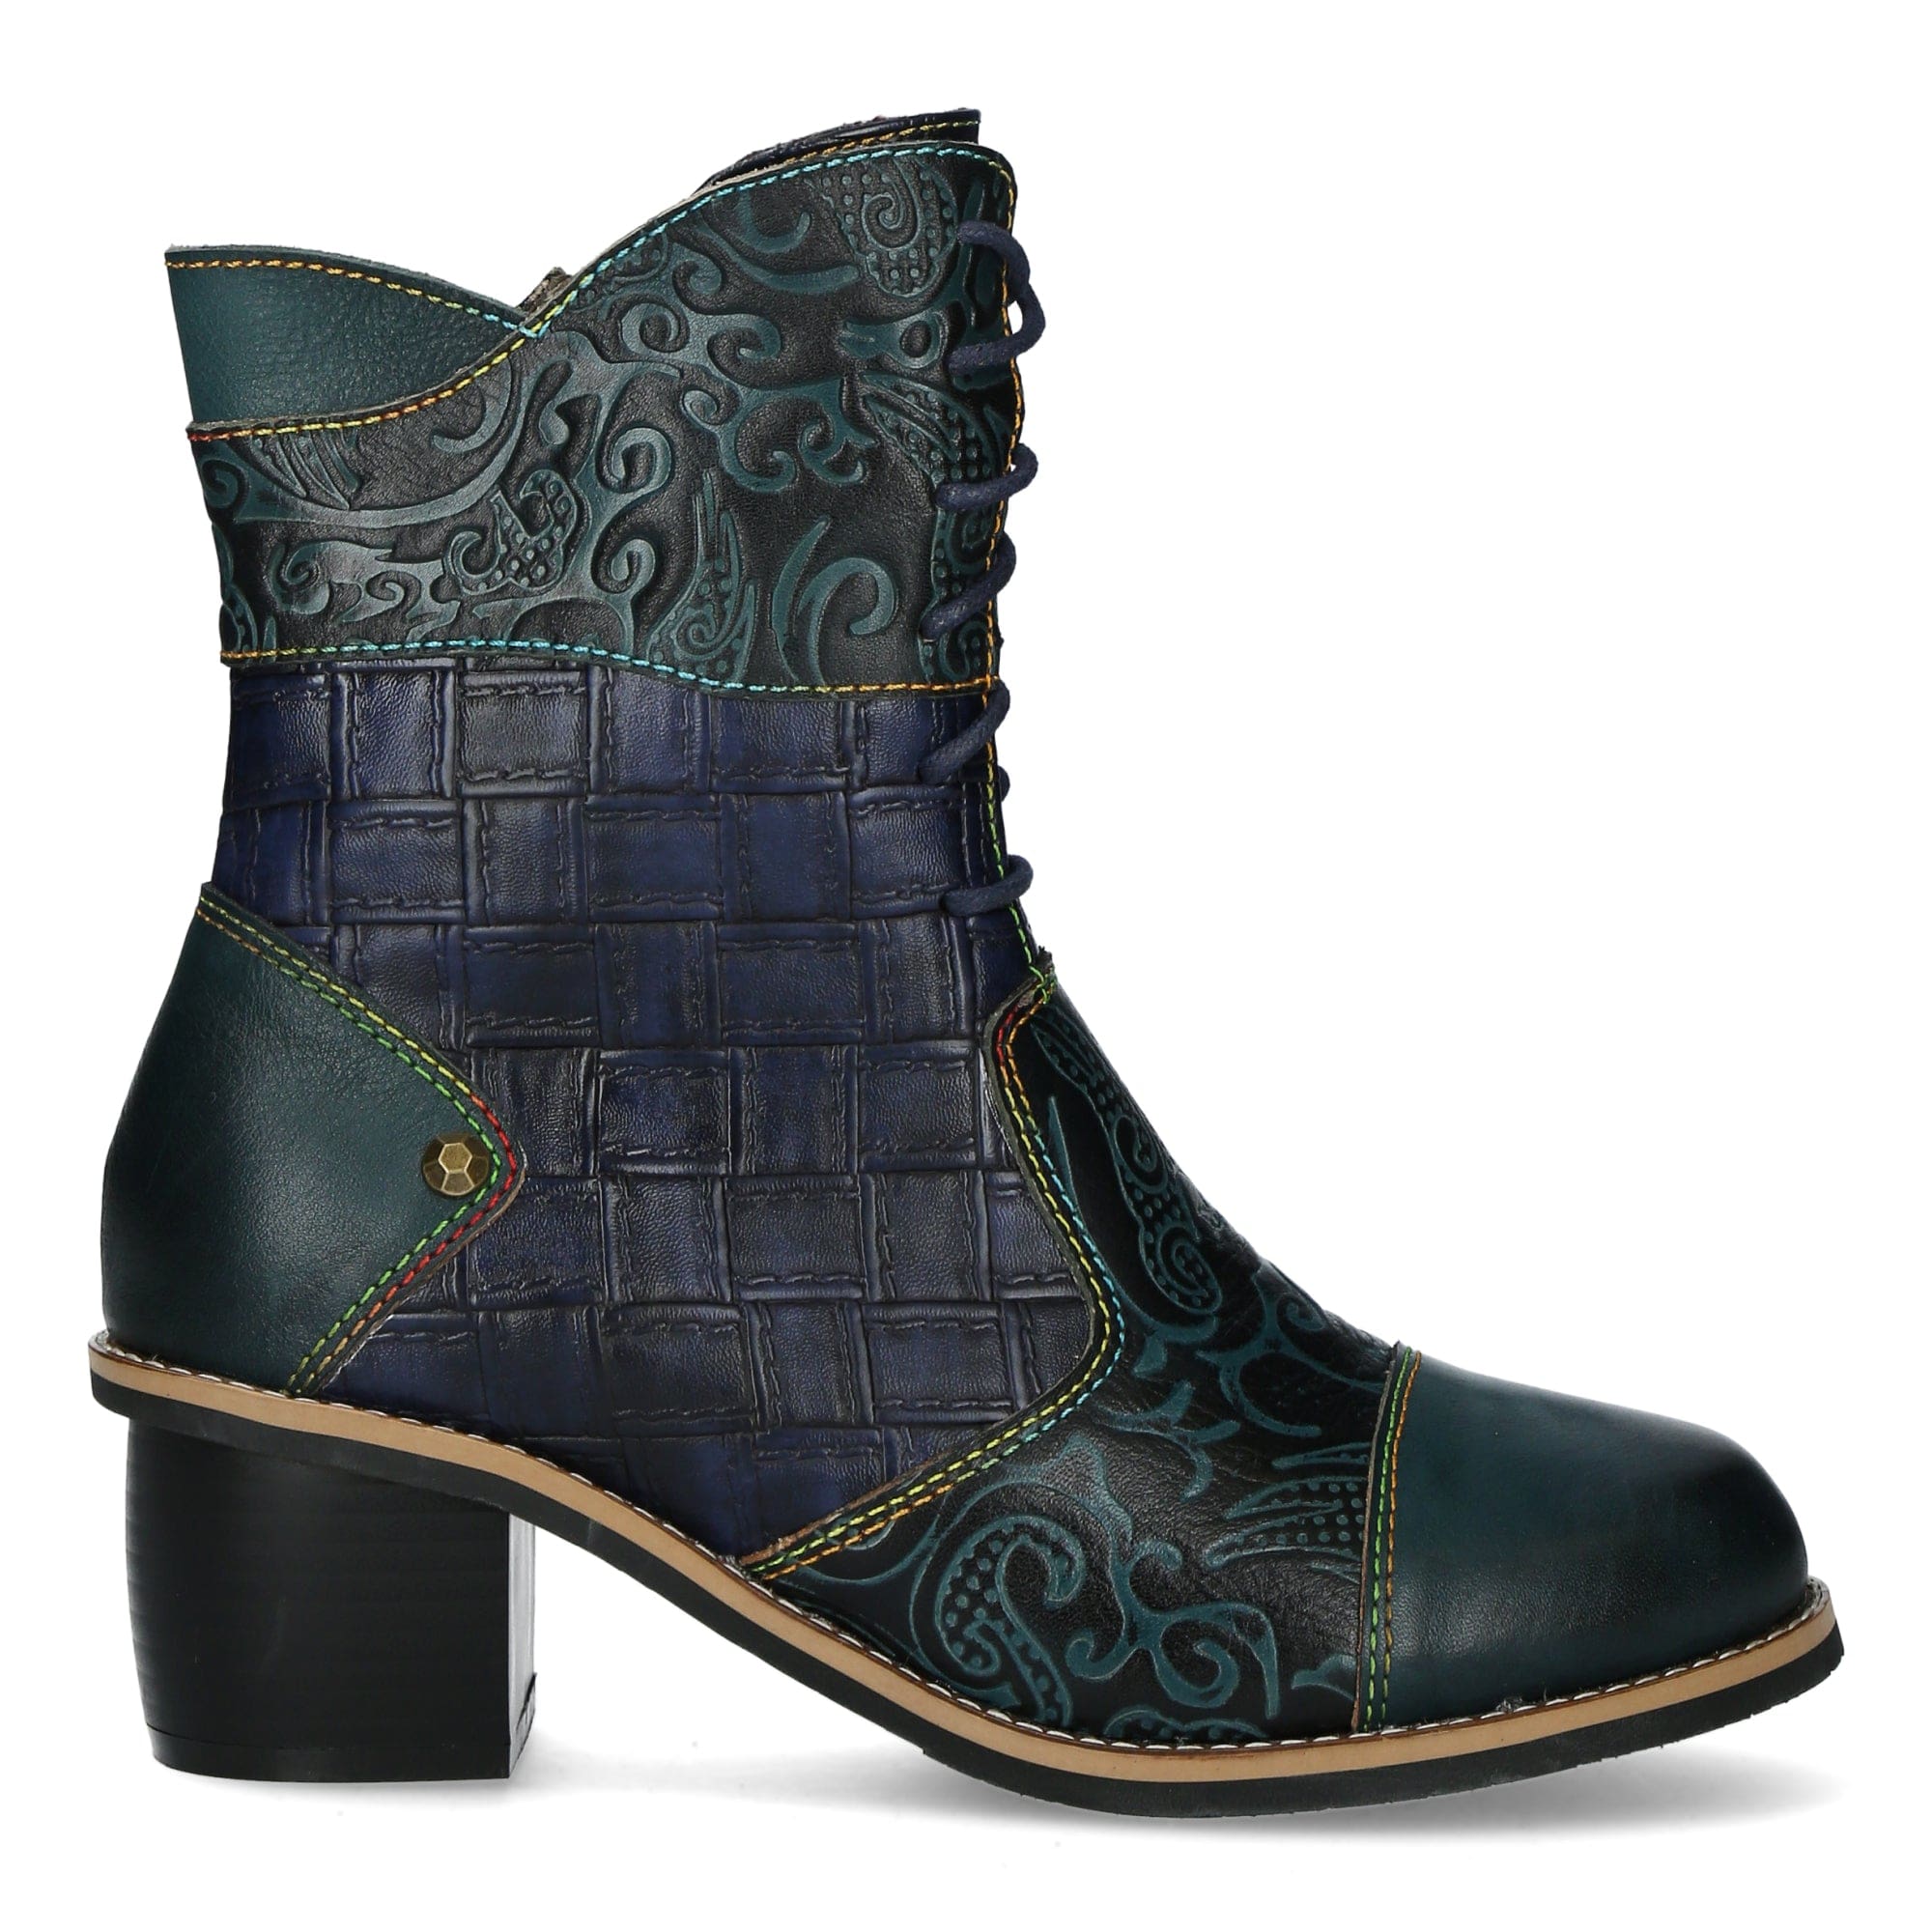 Schuh KITTYO 09 - 35 / Jeans - Boots